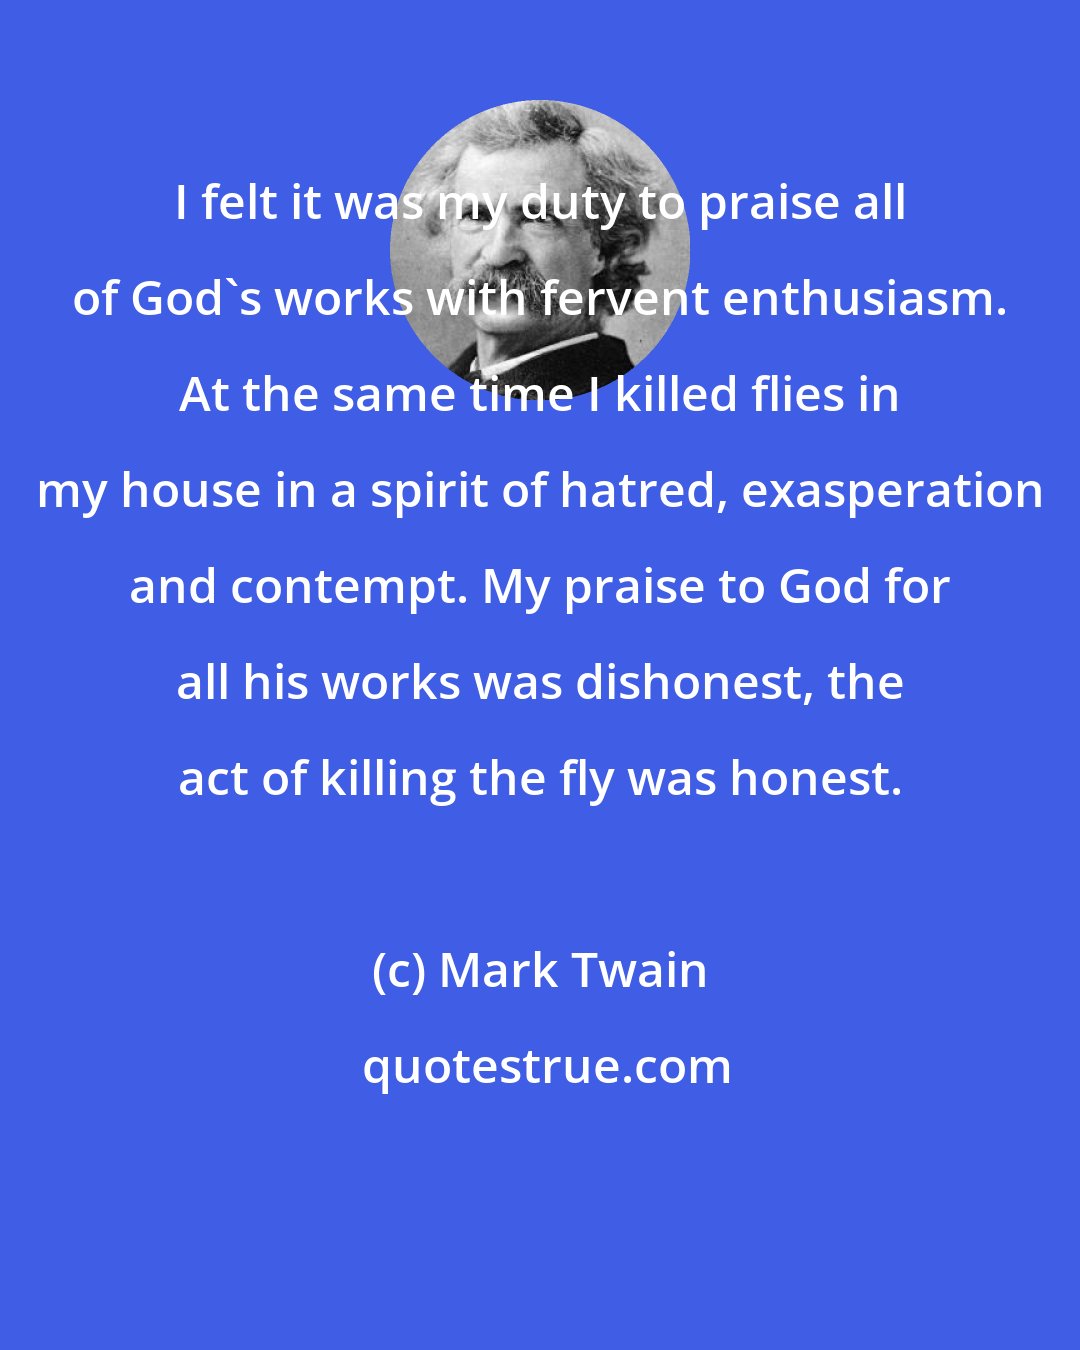 Mark Twain: I felt it was my duty to praise all of God's works with fervent enthusiasm. At the same time I killed flies in my house in a spirit of hatred, exasperation and contempt. My praise to God for all his works was dishonest, the act of killing the fly was honest.